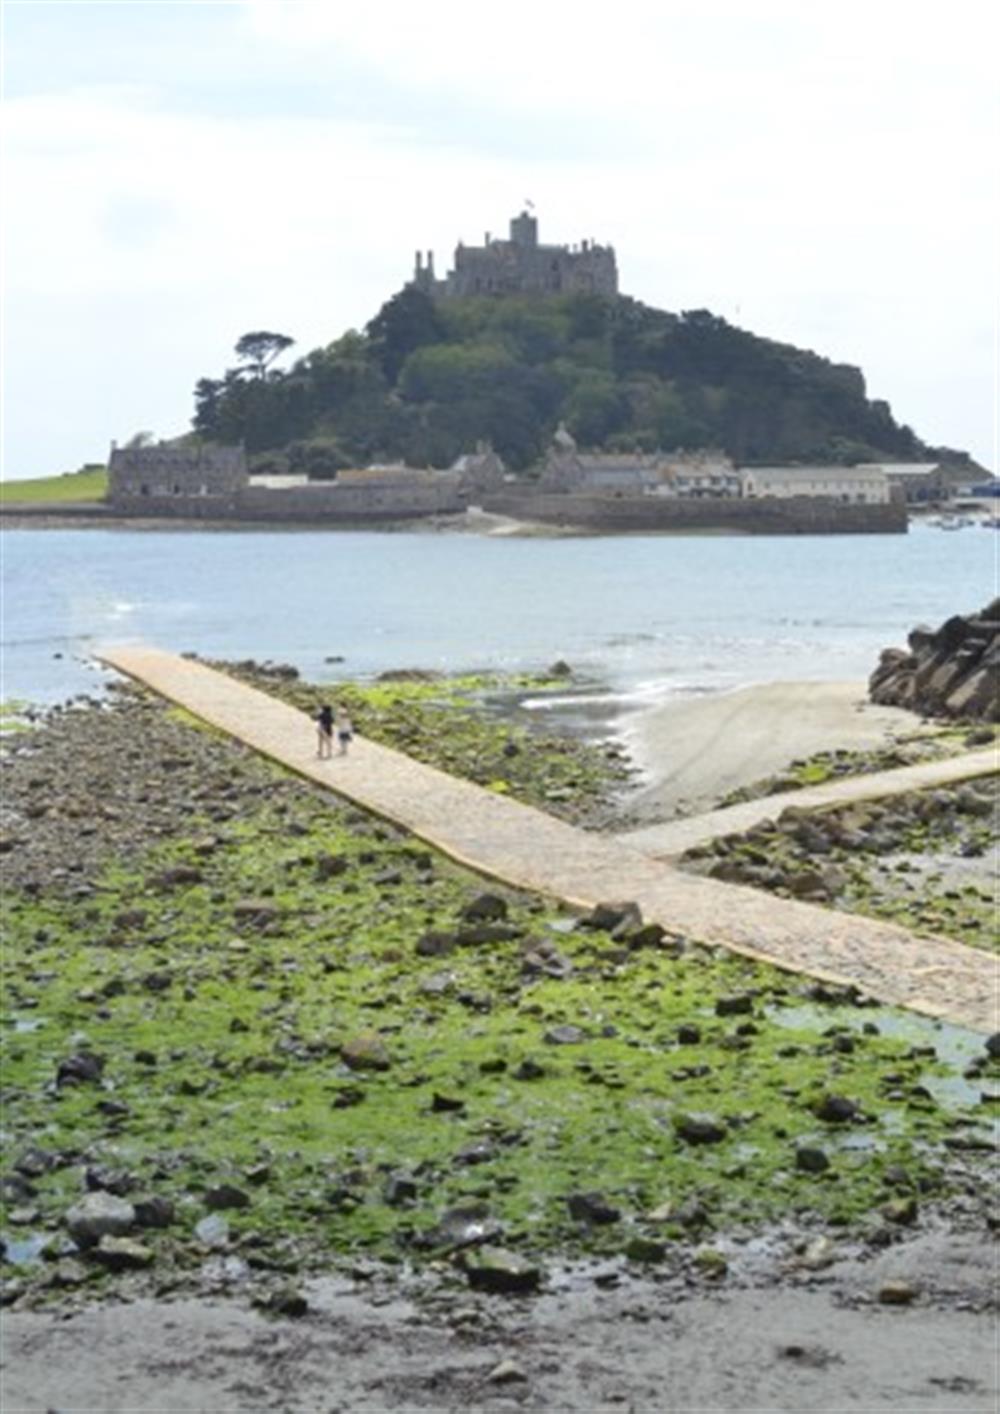 St Michael's Mount is just a 45 minute drive. Walk across the causeway (if the tide is out!) or catch the boat across.